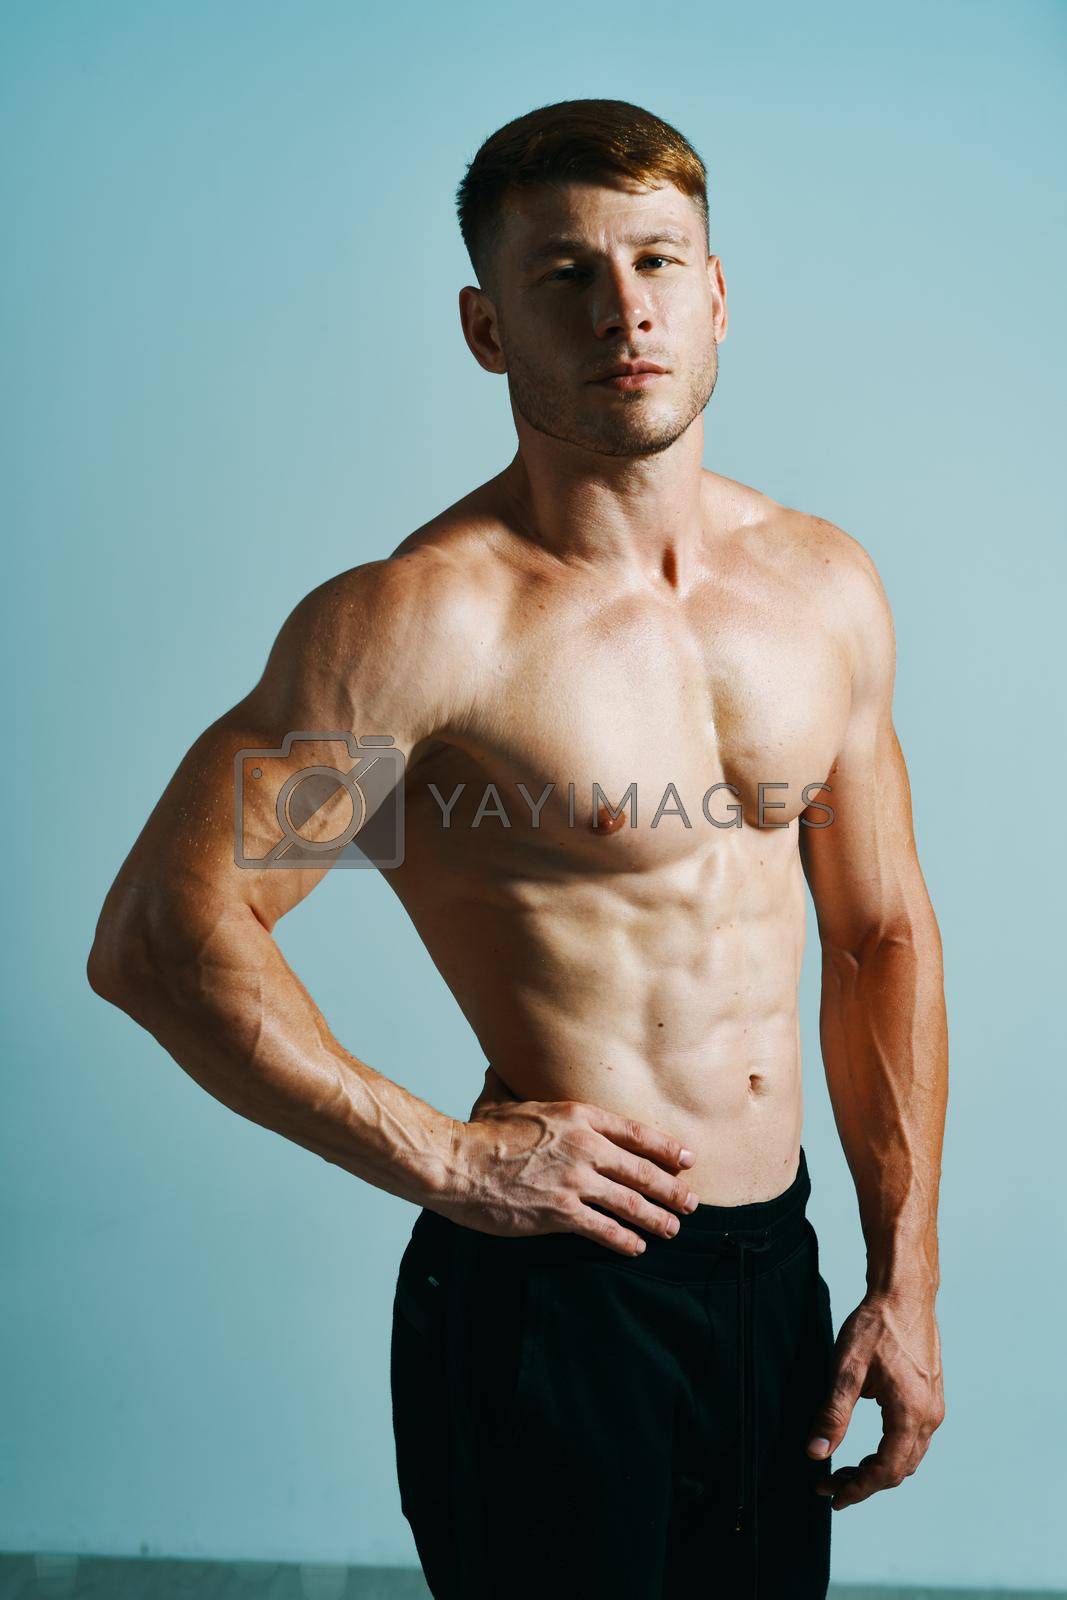 Royalty free image of male with bulging topless muscle workout posing bodybuilder by Vichizh